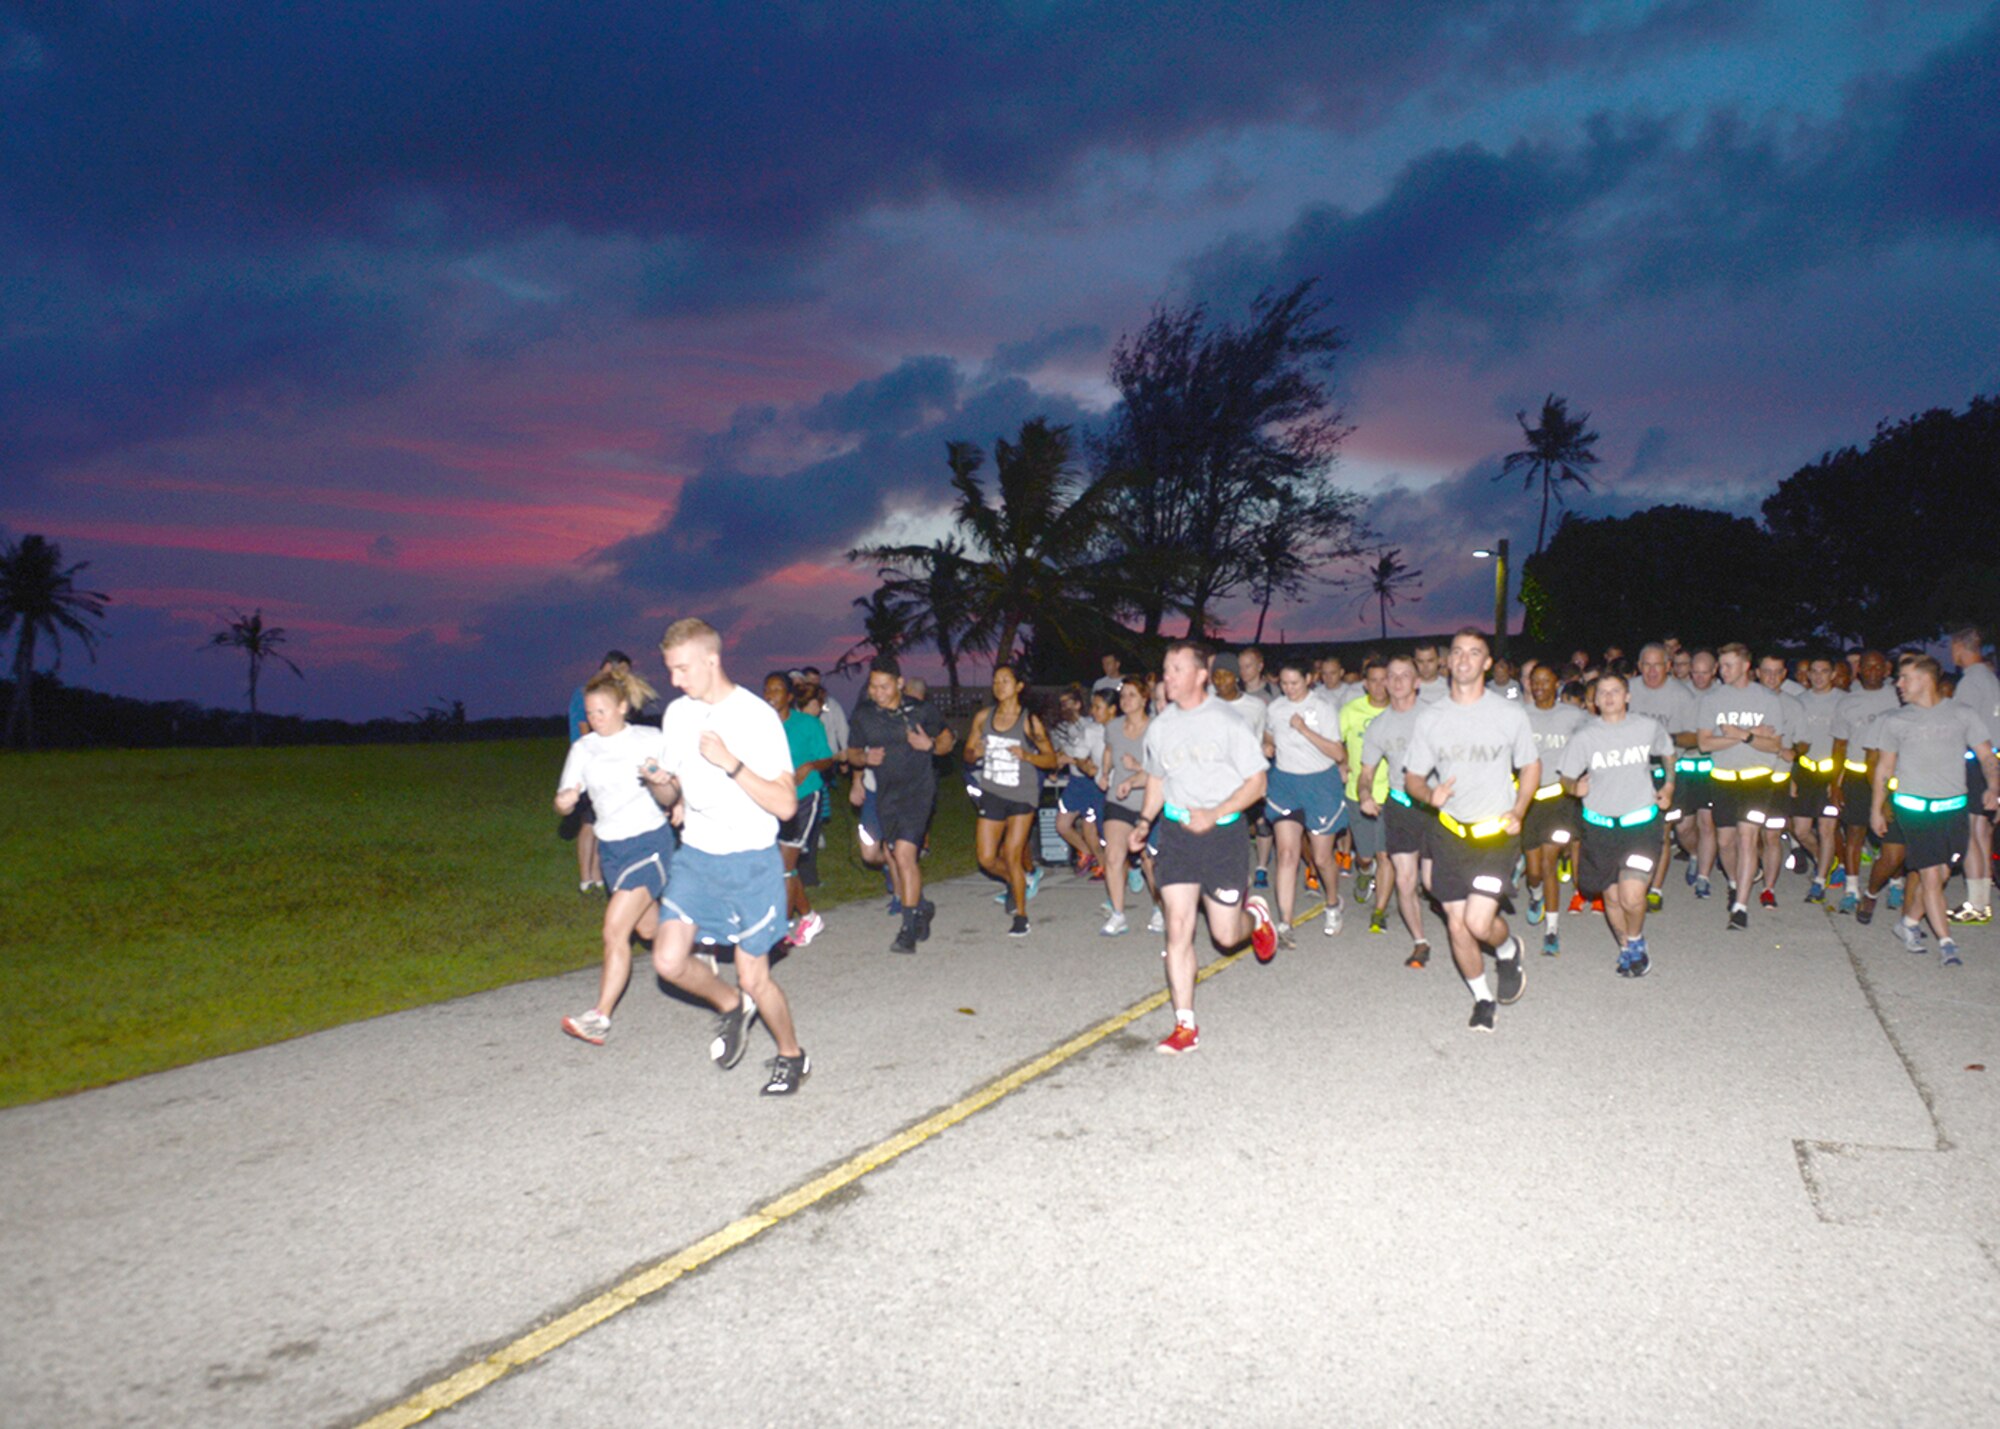 Team Andersen members get the New Year’s Hustle 5K run started during the pre-dawn hours Jan. 14, 2015 at Andersen Air Force Base, Guam. Nearly 100 Andersen Airmen, U.S. Army Soldiers from Task Force Talon, civilians and family members took part in the run that required runners to run from the Palm Tree Golf Course Driving Range to the Guam Air National Guard’s 254th RED HORSE Squadron headquarters and back. (U.S. Air Force photo by Tech. Sgt. Zachary Wilson/Released.)